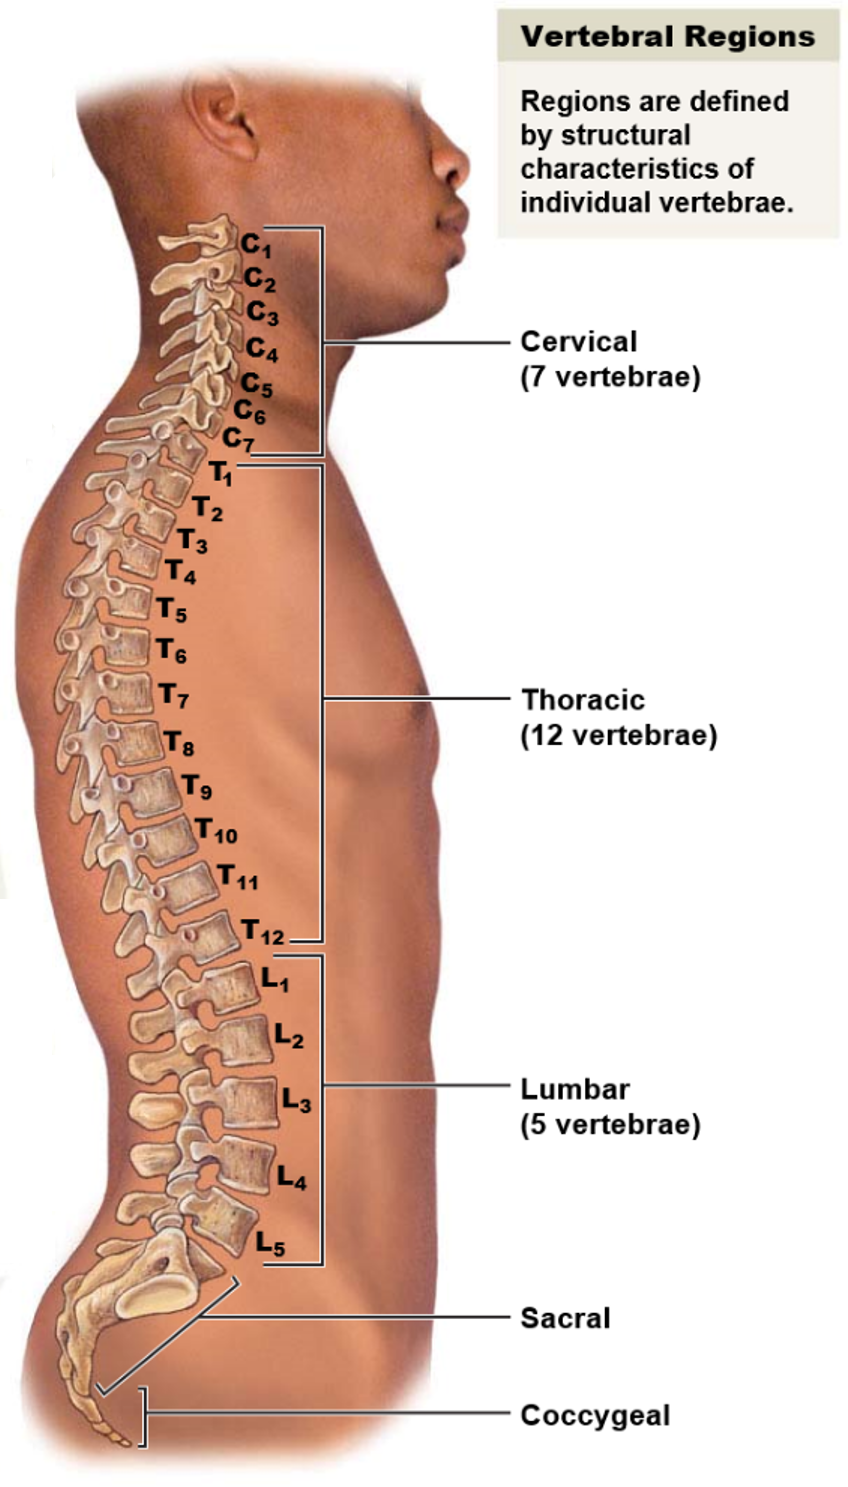 <p>The functions of the vertebral column include:</p><ul><li><p>Support of head, neck and trunk</p></li><li><p>Facilitation of the transmission of weight and forces throughout the body</p></li><li><p>Protection of the spinal cord</p></li><li><p>Maintenance of posture when sitting and standing.</p></li></ul>